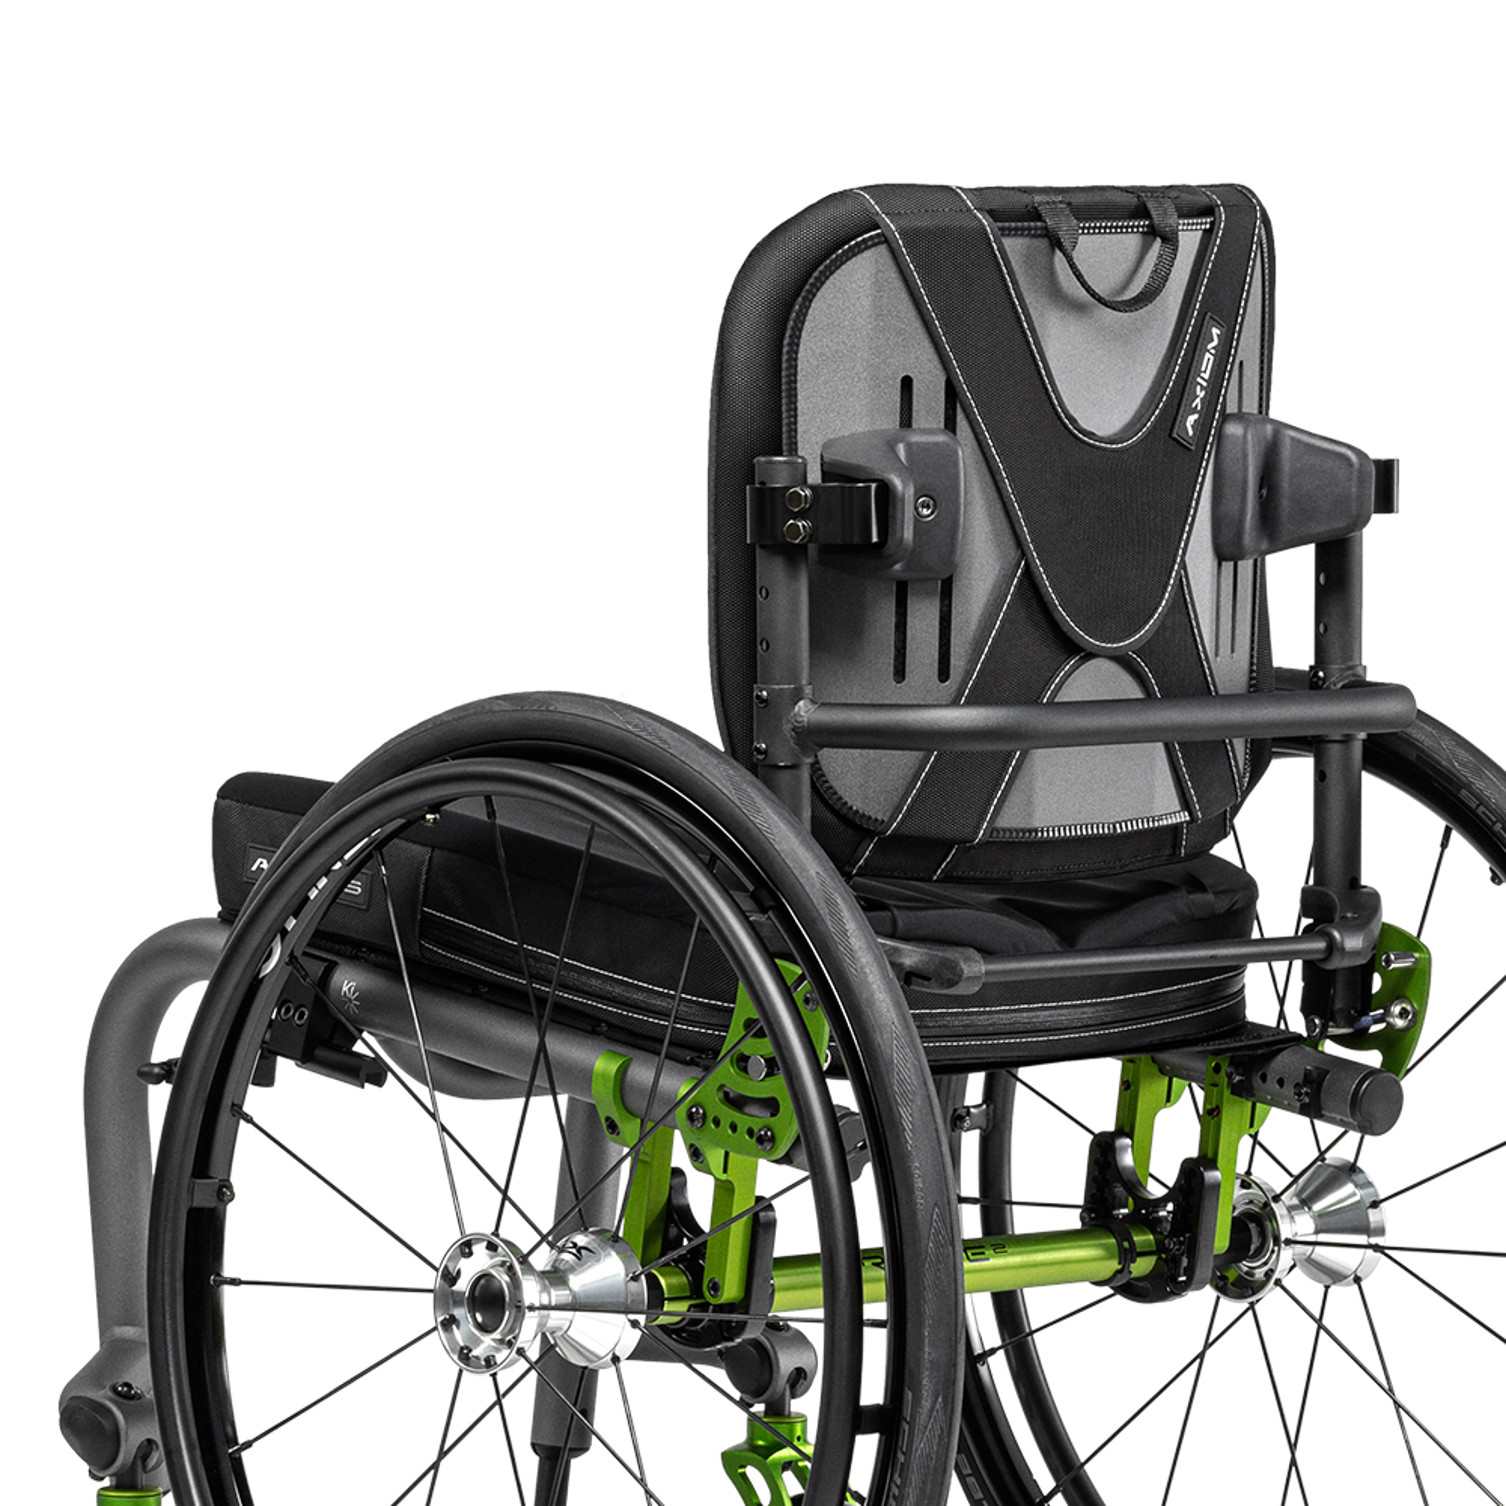 /globalassets/inriver/resources/image/structureimage/wheelchair-backs_1000x1000px.jpg?width=1506&Quality=90&rmode=max&scale=down